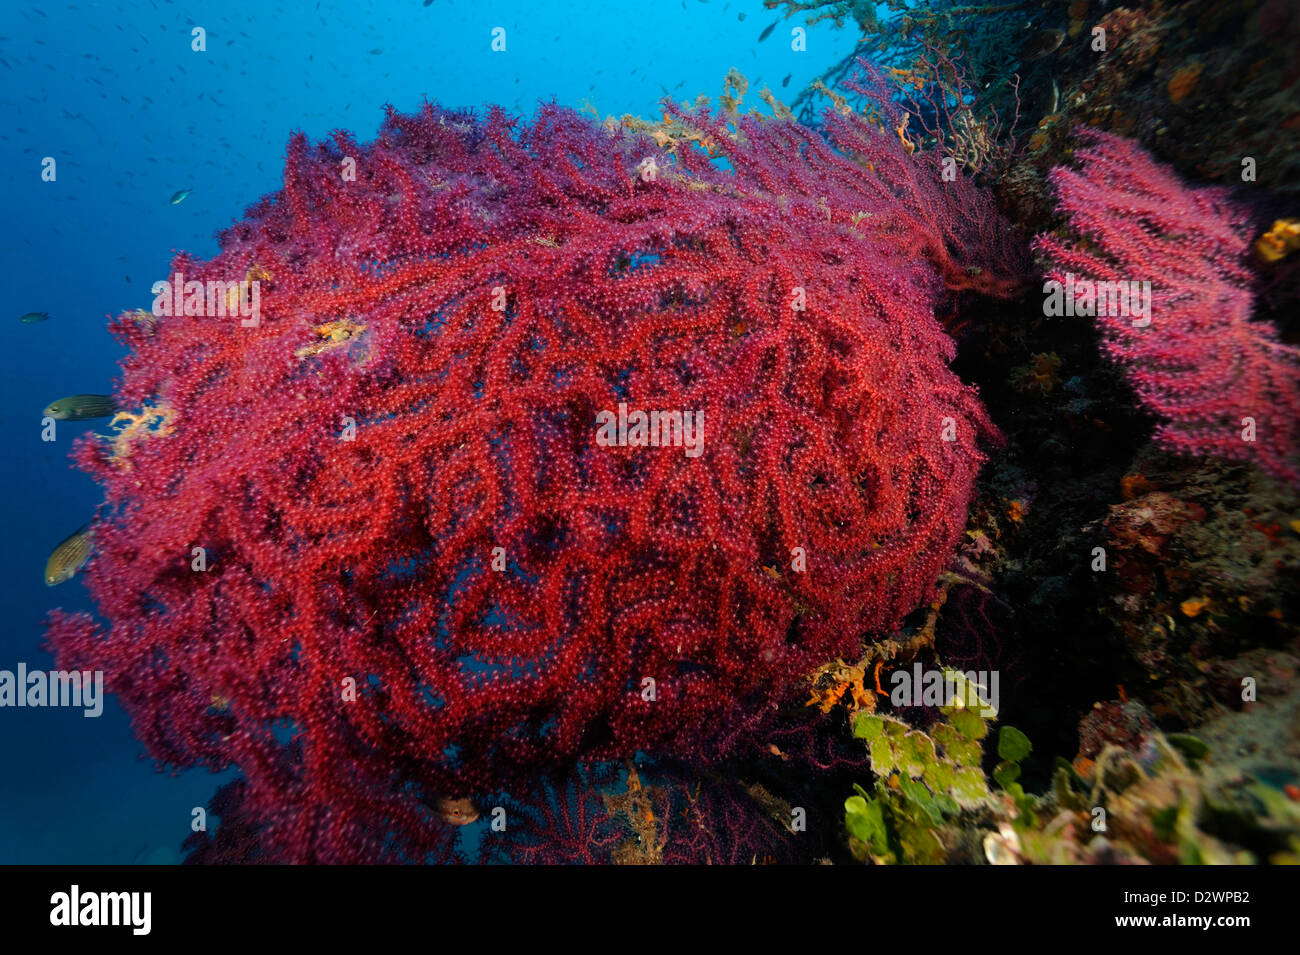 underwater view of red sea fans corals on coral reef, Paramuricea clavata, Mediterranean Sea, France Stock Photo